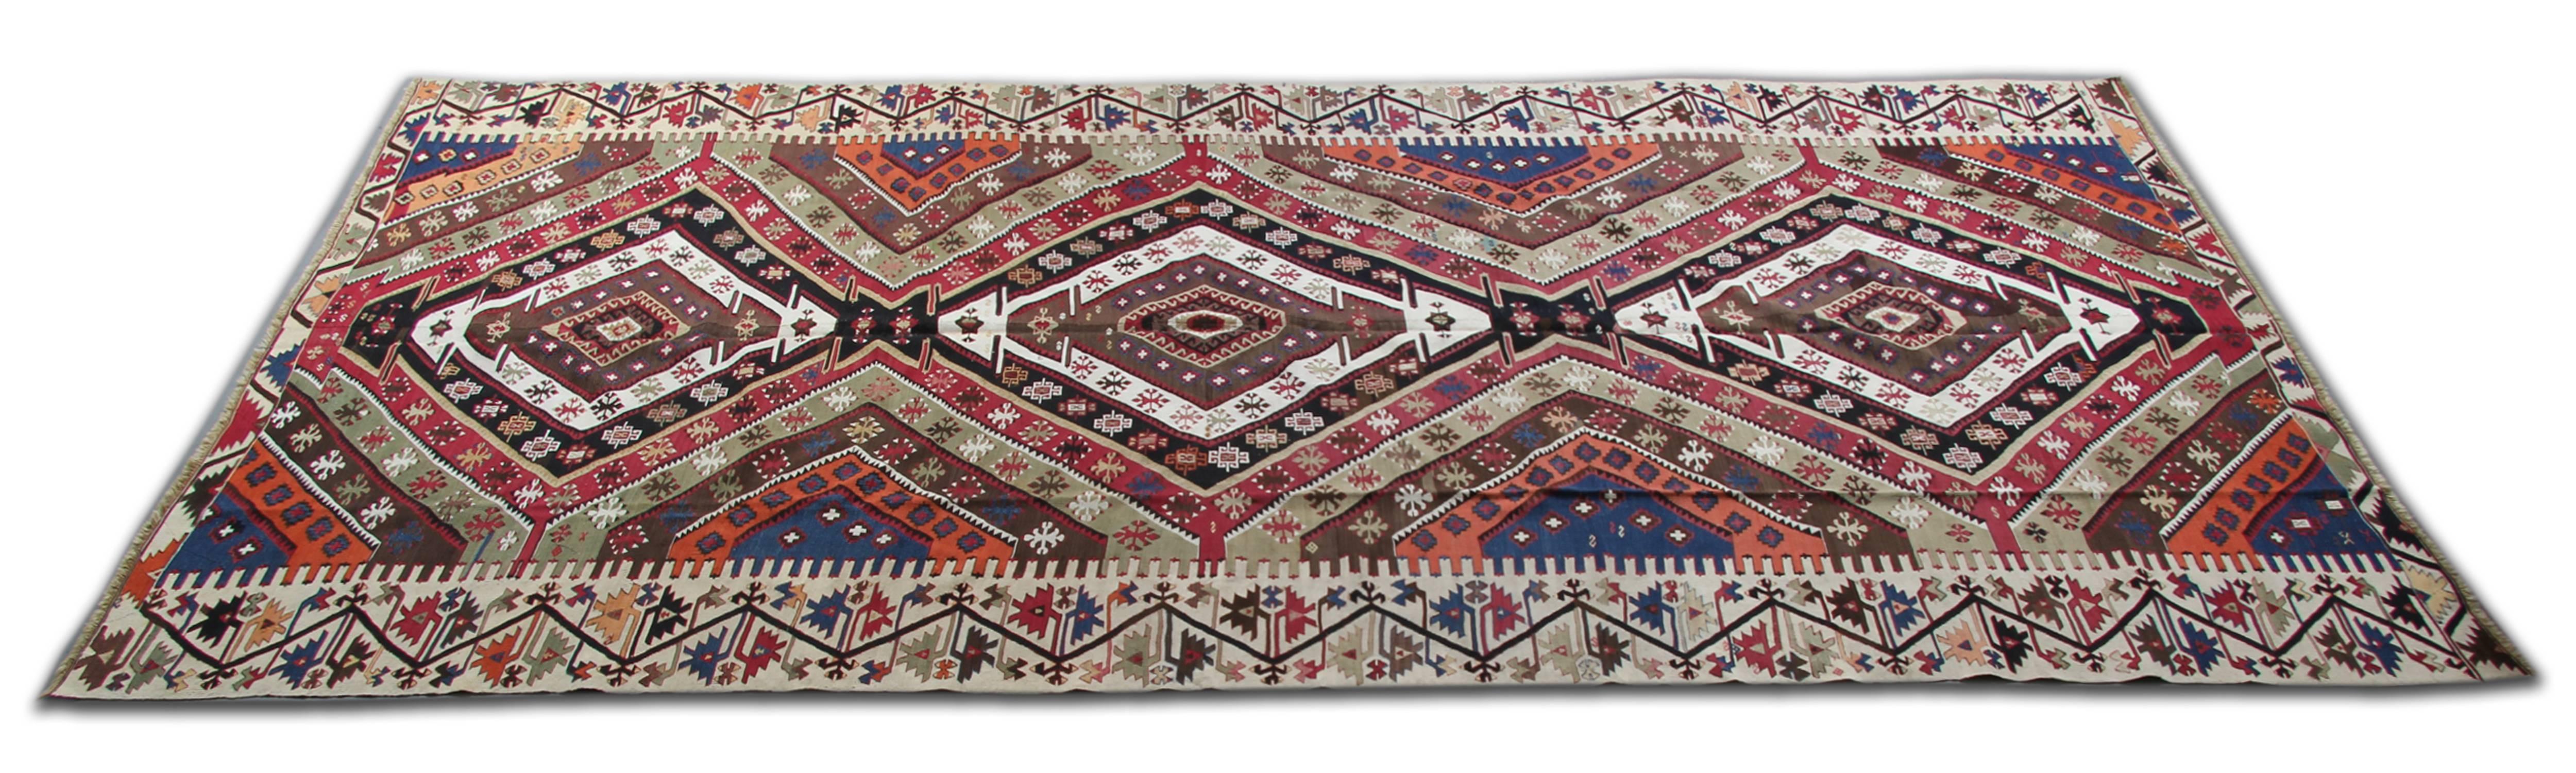 This handmade carpet Geometrical Turkish rug is antique rug traditional handwoven runner rugs come from the Oriental rug design world. This kind of carpet runners is suitable for stair runners and hallway rugs. in a striking color combination of